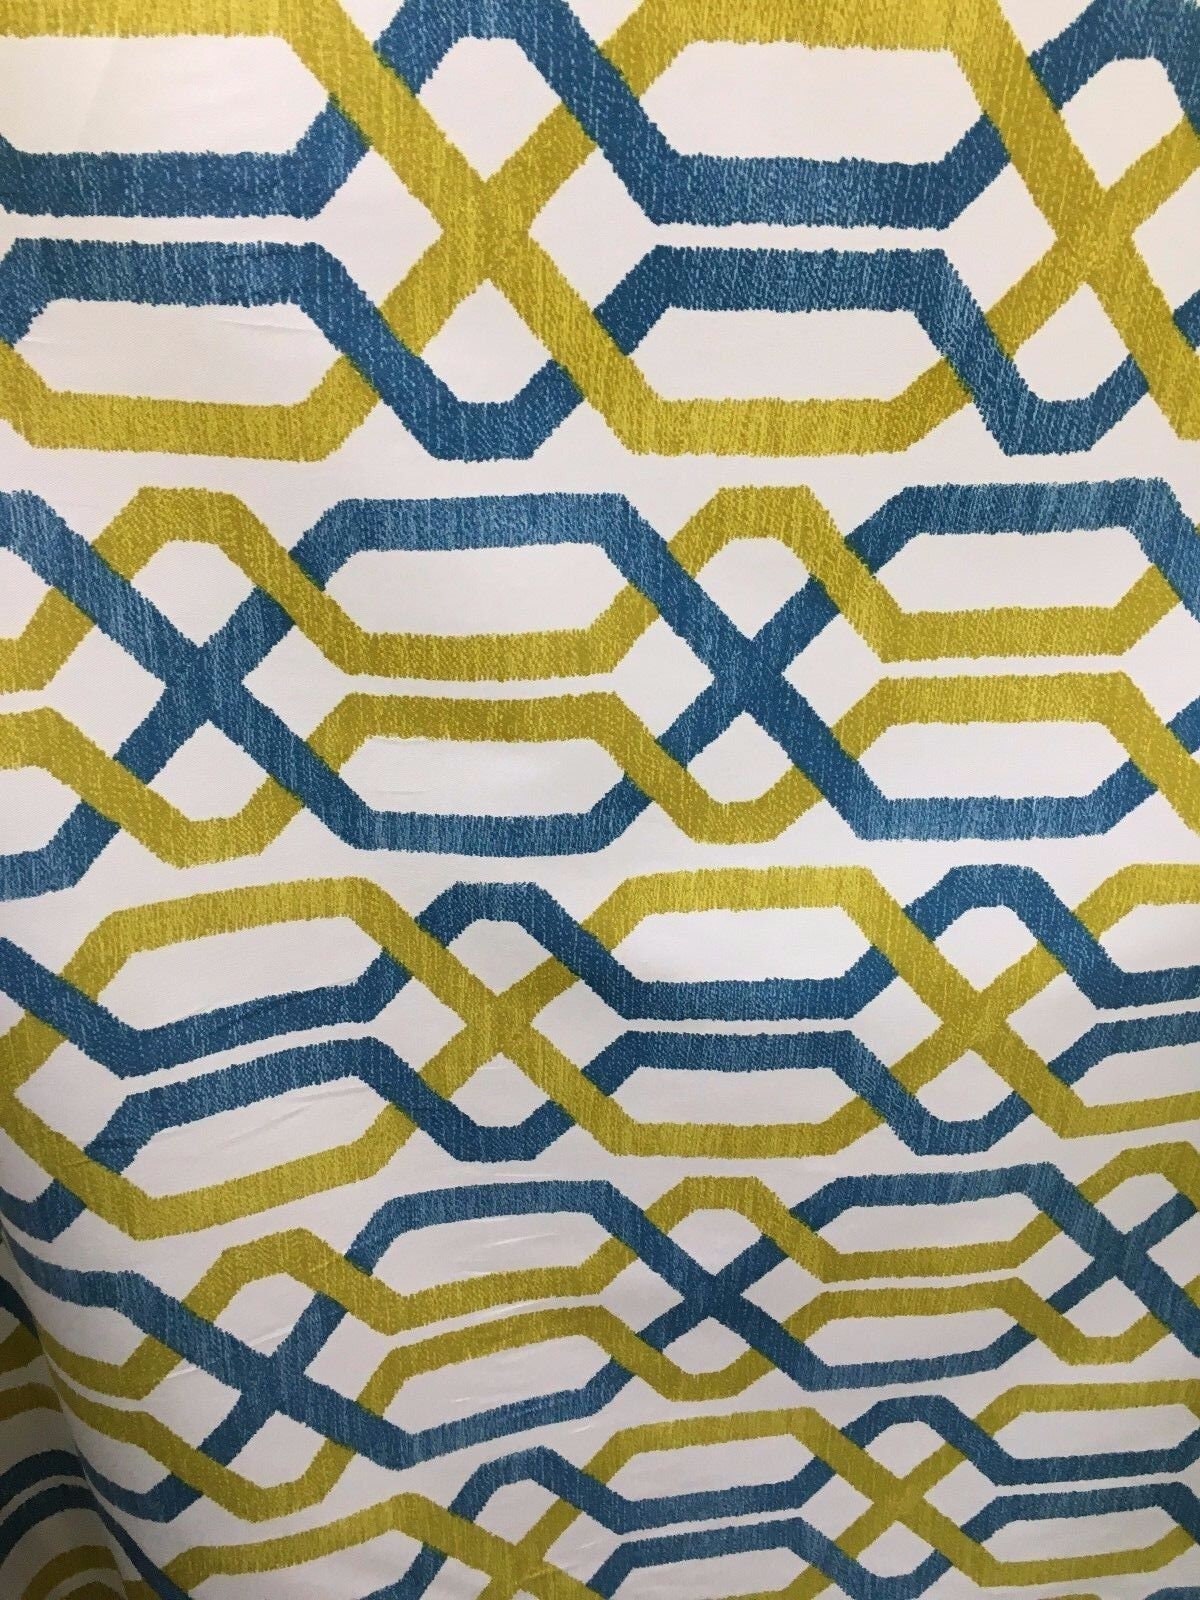 P KAUFMANN Yellow Teal Designer 100% Cotton Fabric (54 in.) Sold By The Yard